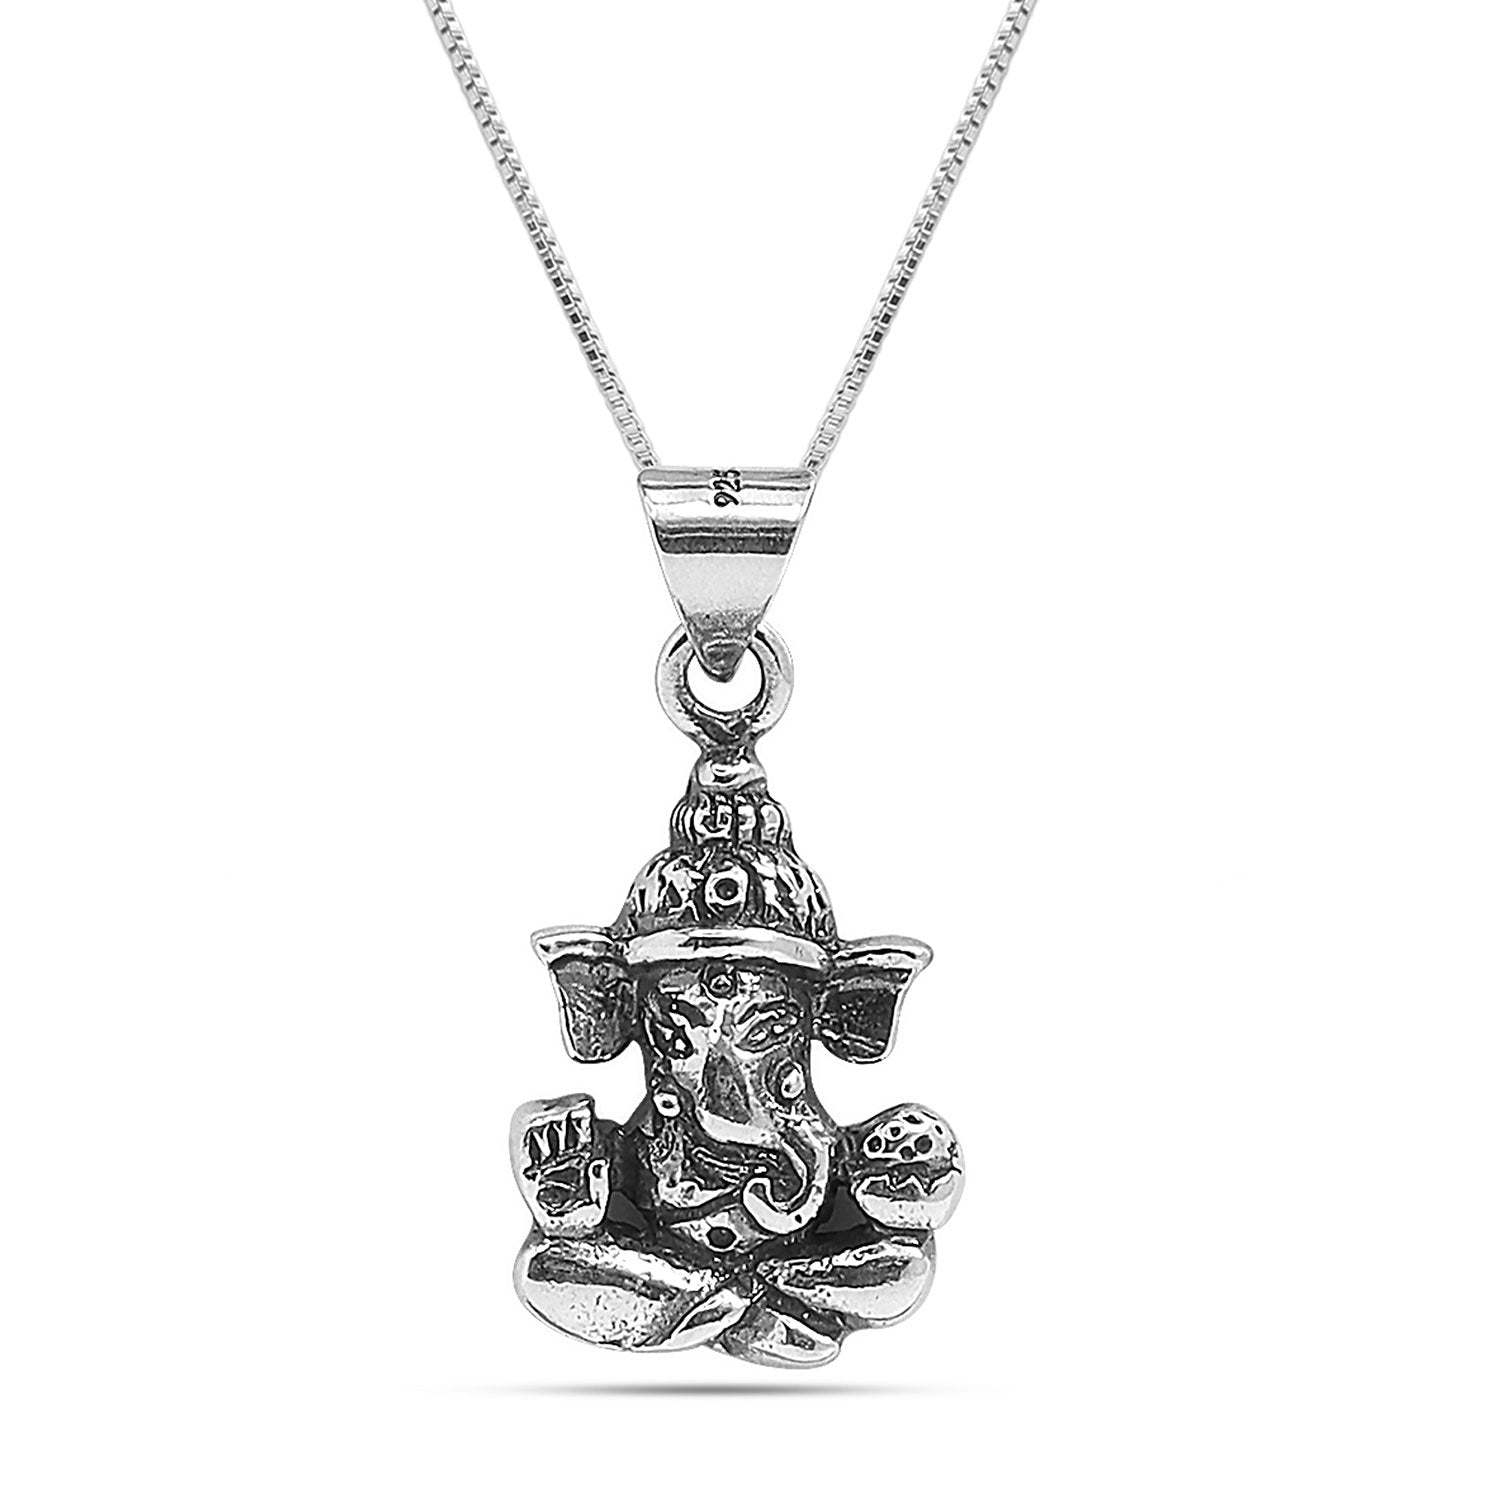 925 Sterling Silver Oxidized Ganeshji Pendant Necklace for Men and Women